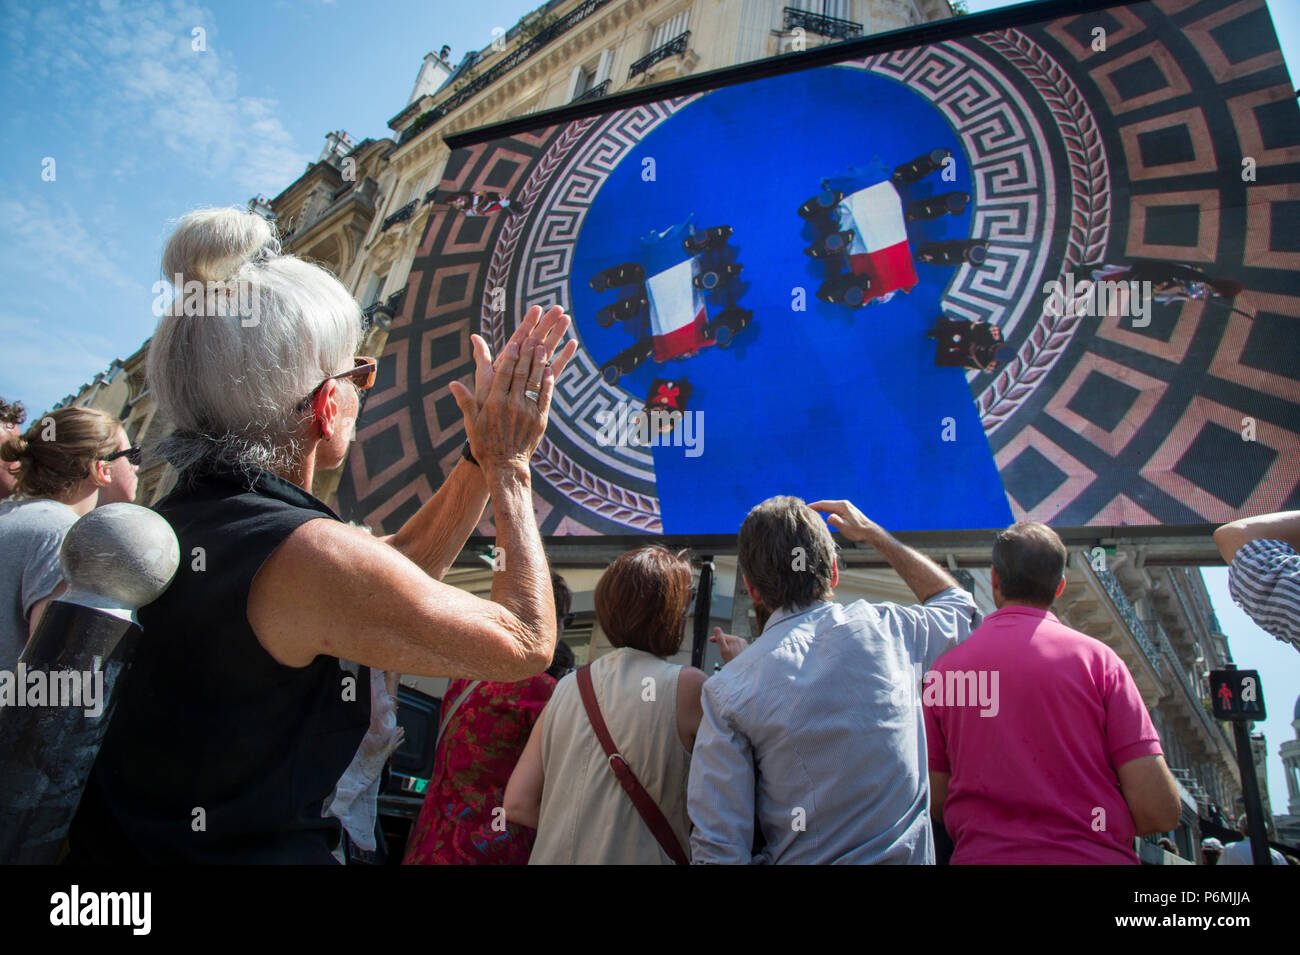 People are seen watching the burial ceremony on a huge screen. Burial ceremony at the Pantheon of former French politician and Holocaust survivor Simone Veil and her husband Antoine Veil in Paris. Former Health Minister, Simone Veil, who passed away on June 30, 2017 became president of the European Parliament and one of France's most revered politicians by advocating the 1975 law legalizing abortion in France. Stock Photo